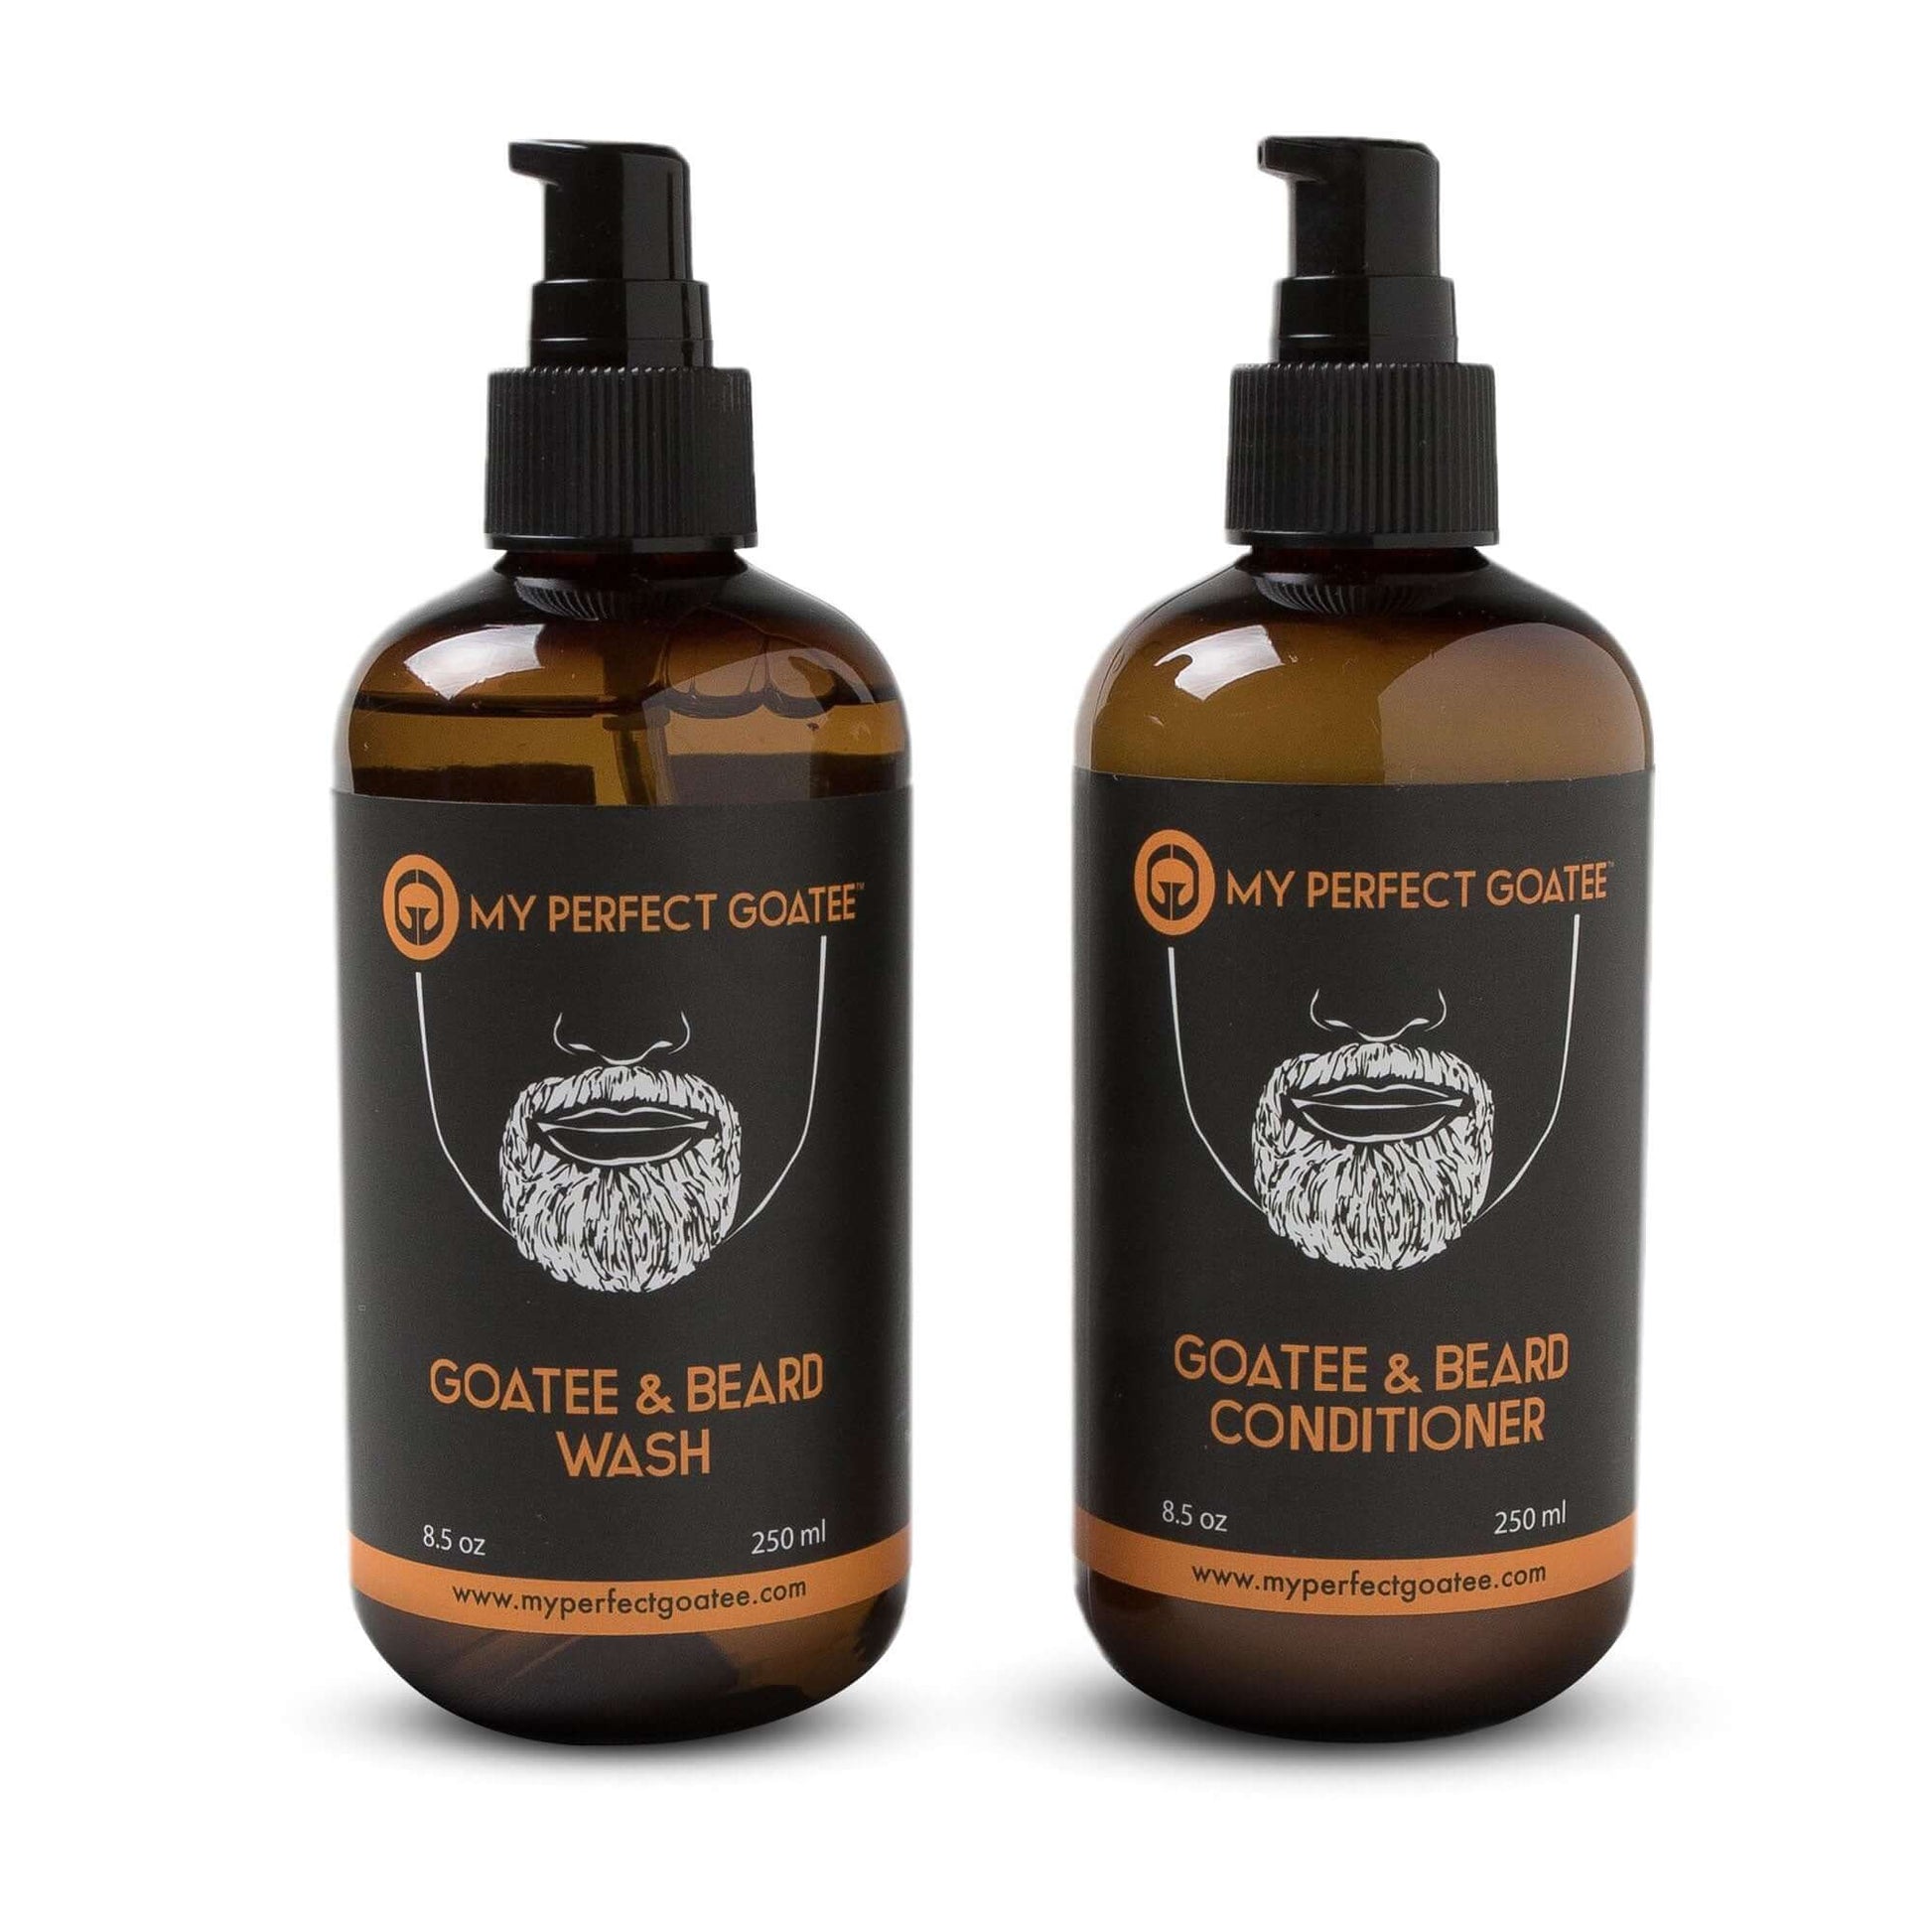 Image of My Perfect Goatee® Beard Wash and Beard Conditioner